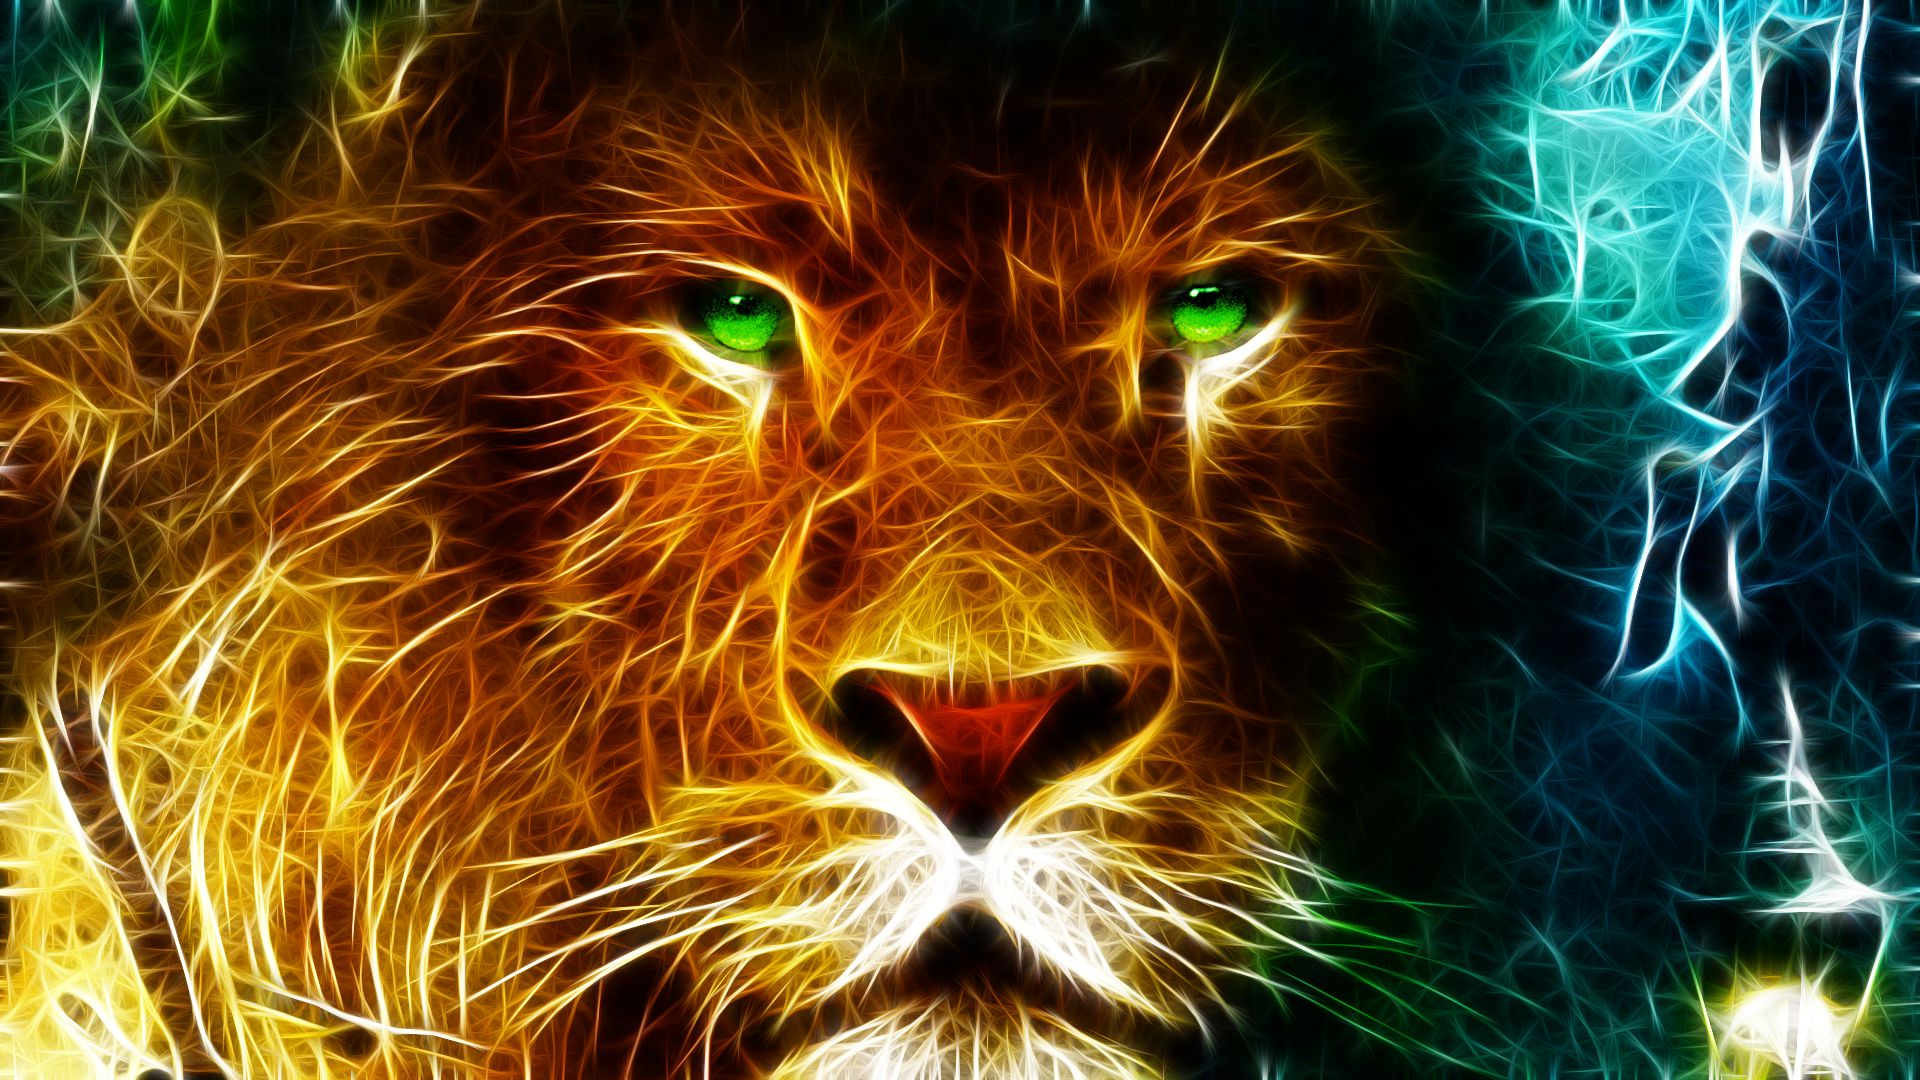 Lion wallpapers for desktop, download free Lion pictures and backgrounds  for PC 